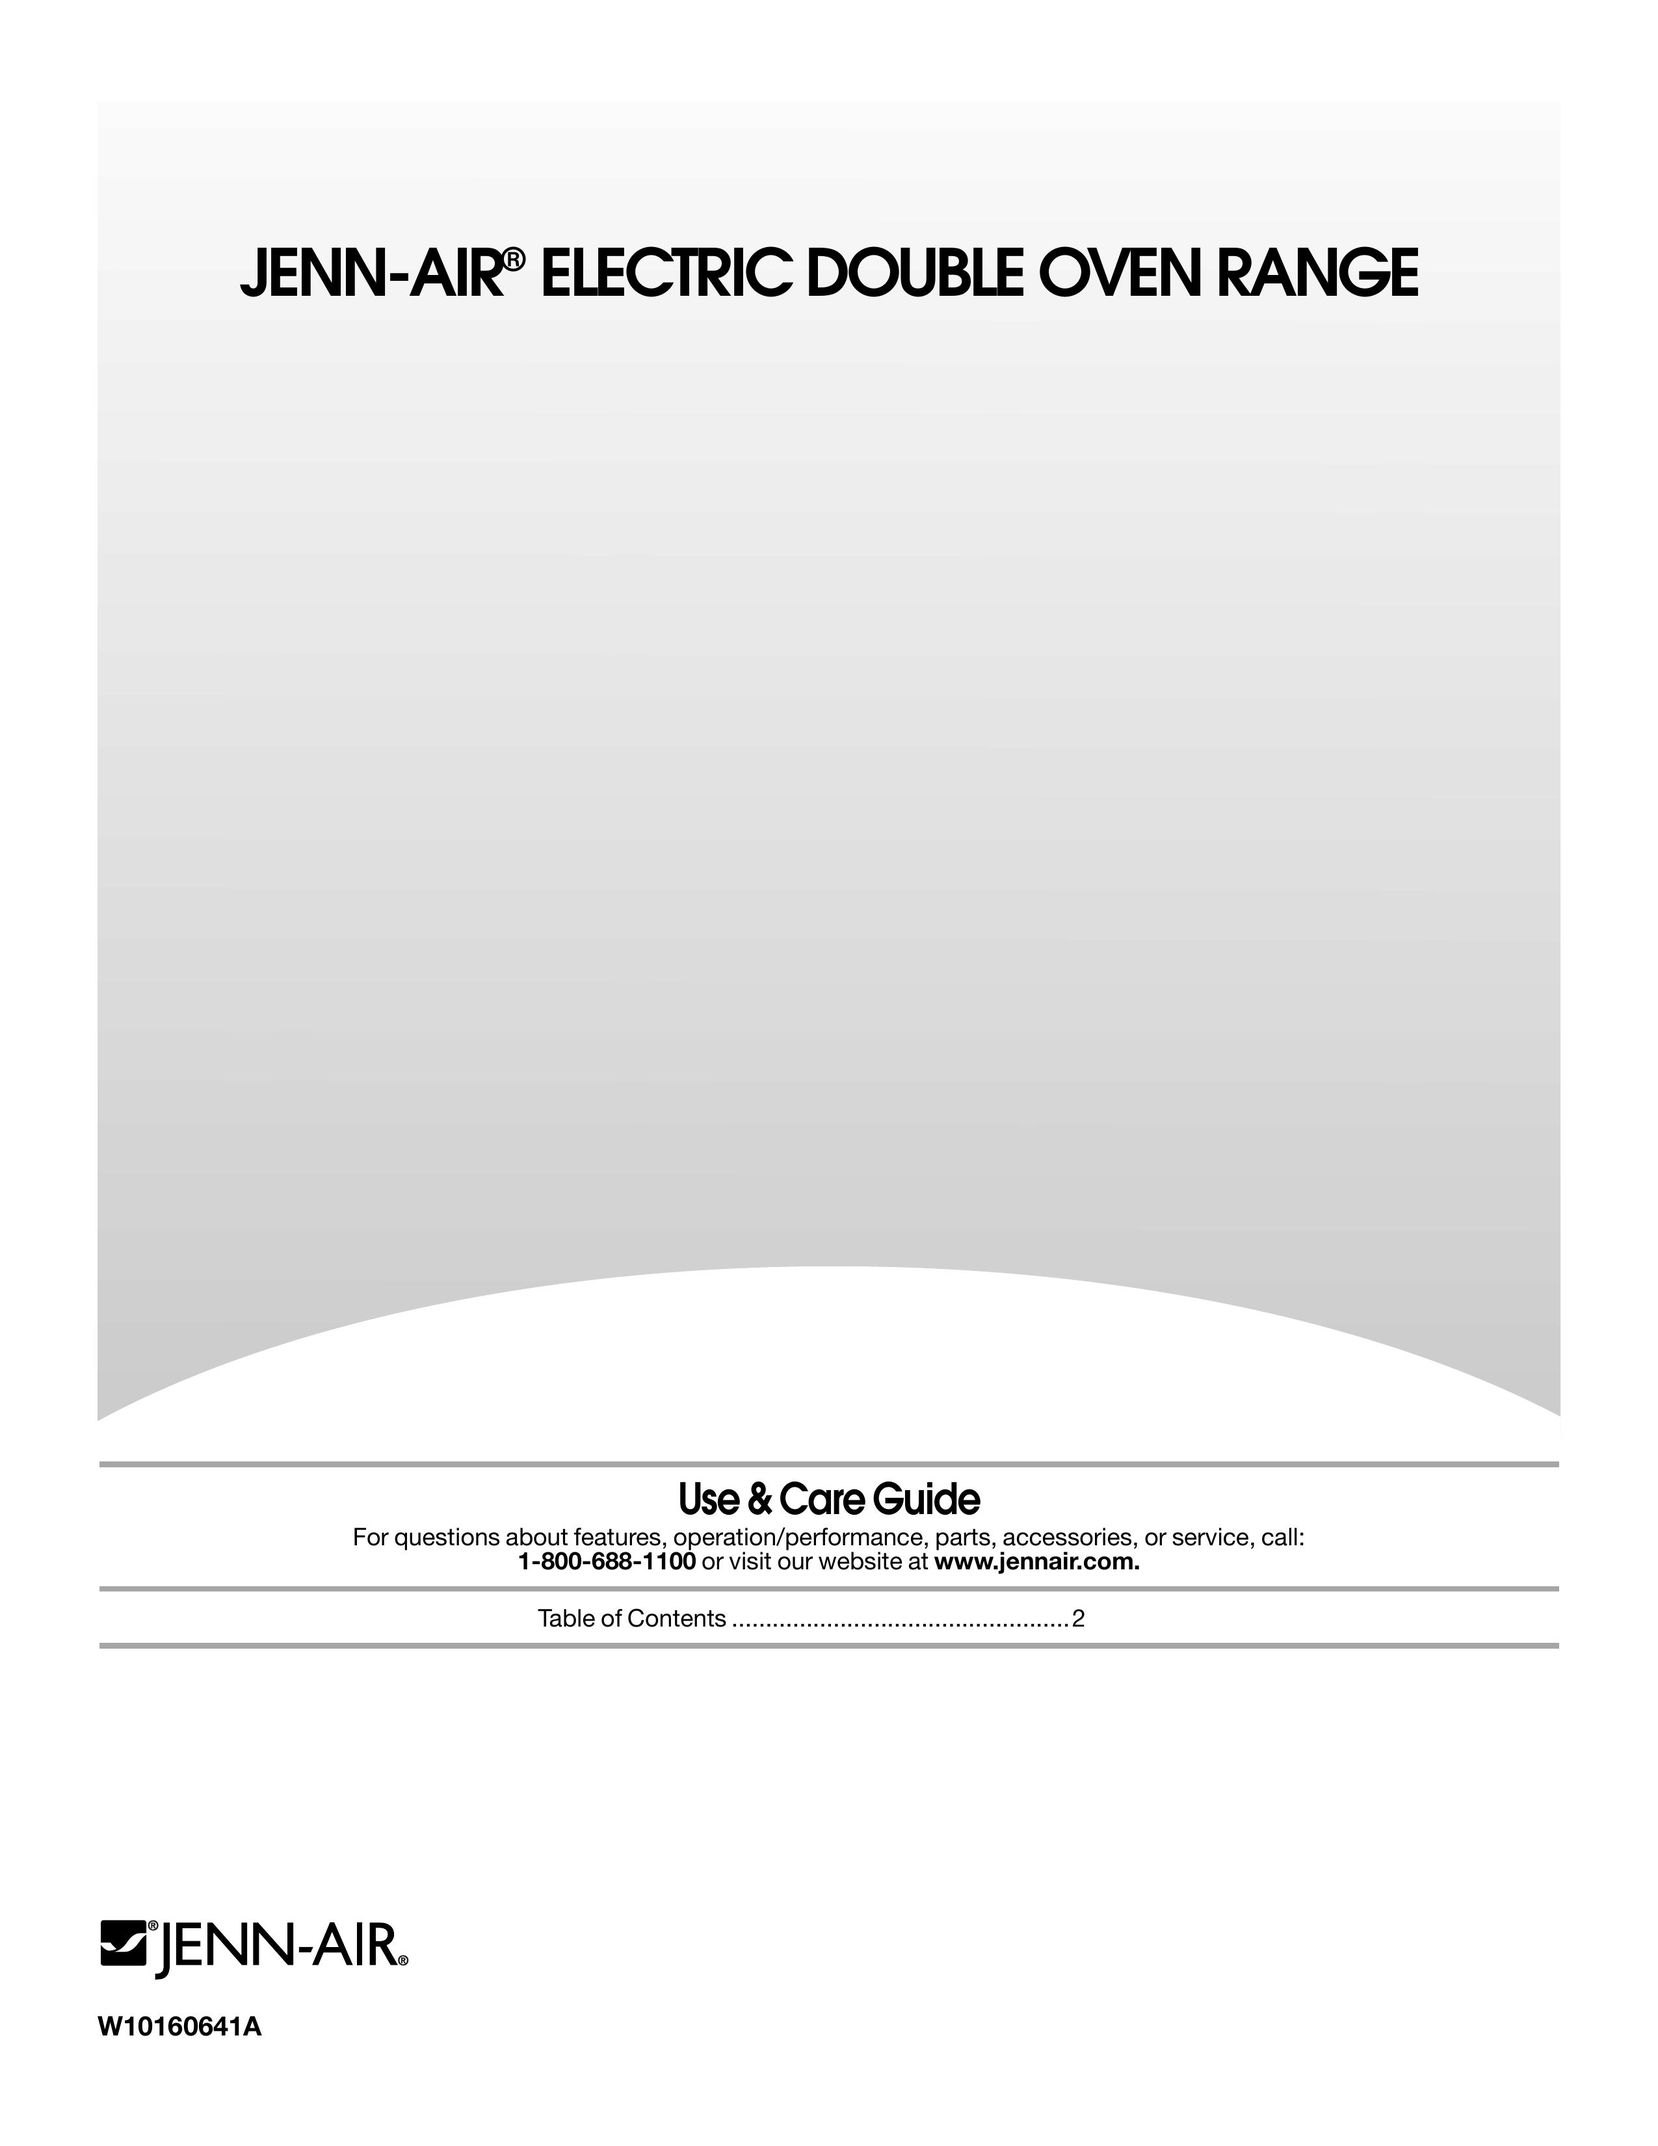 Jenn-Air W10160641A Double Oven User Manual